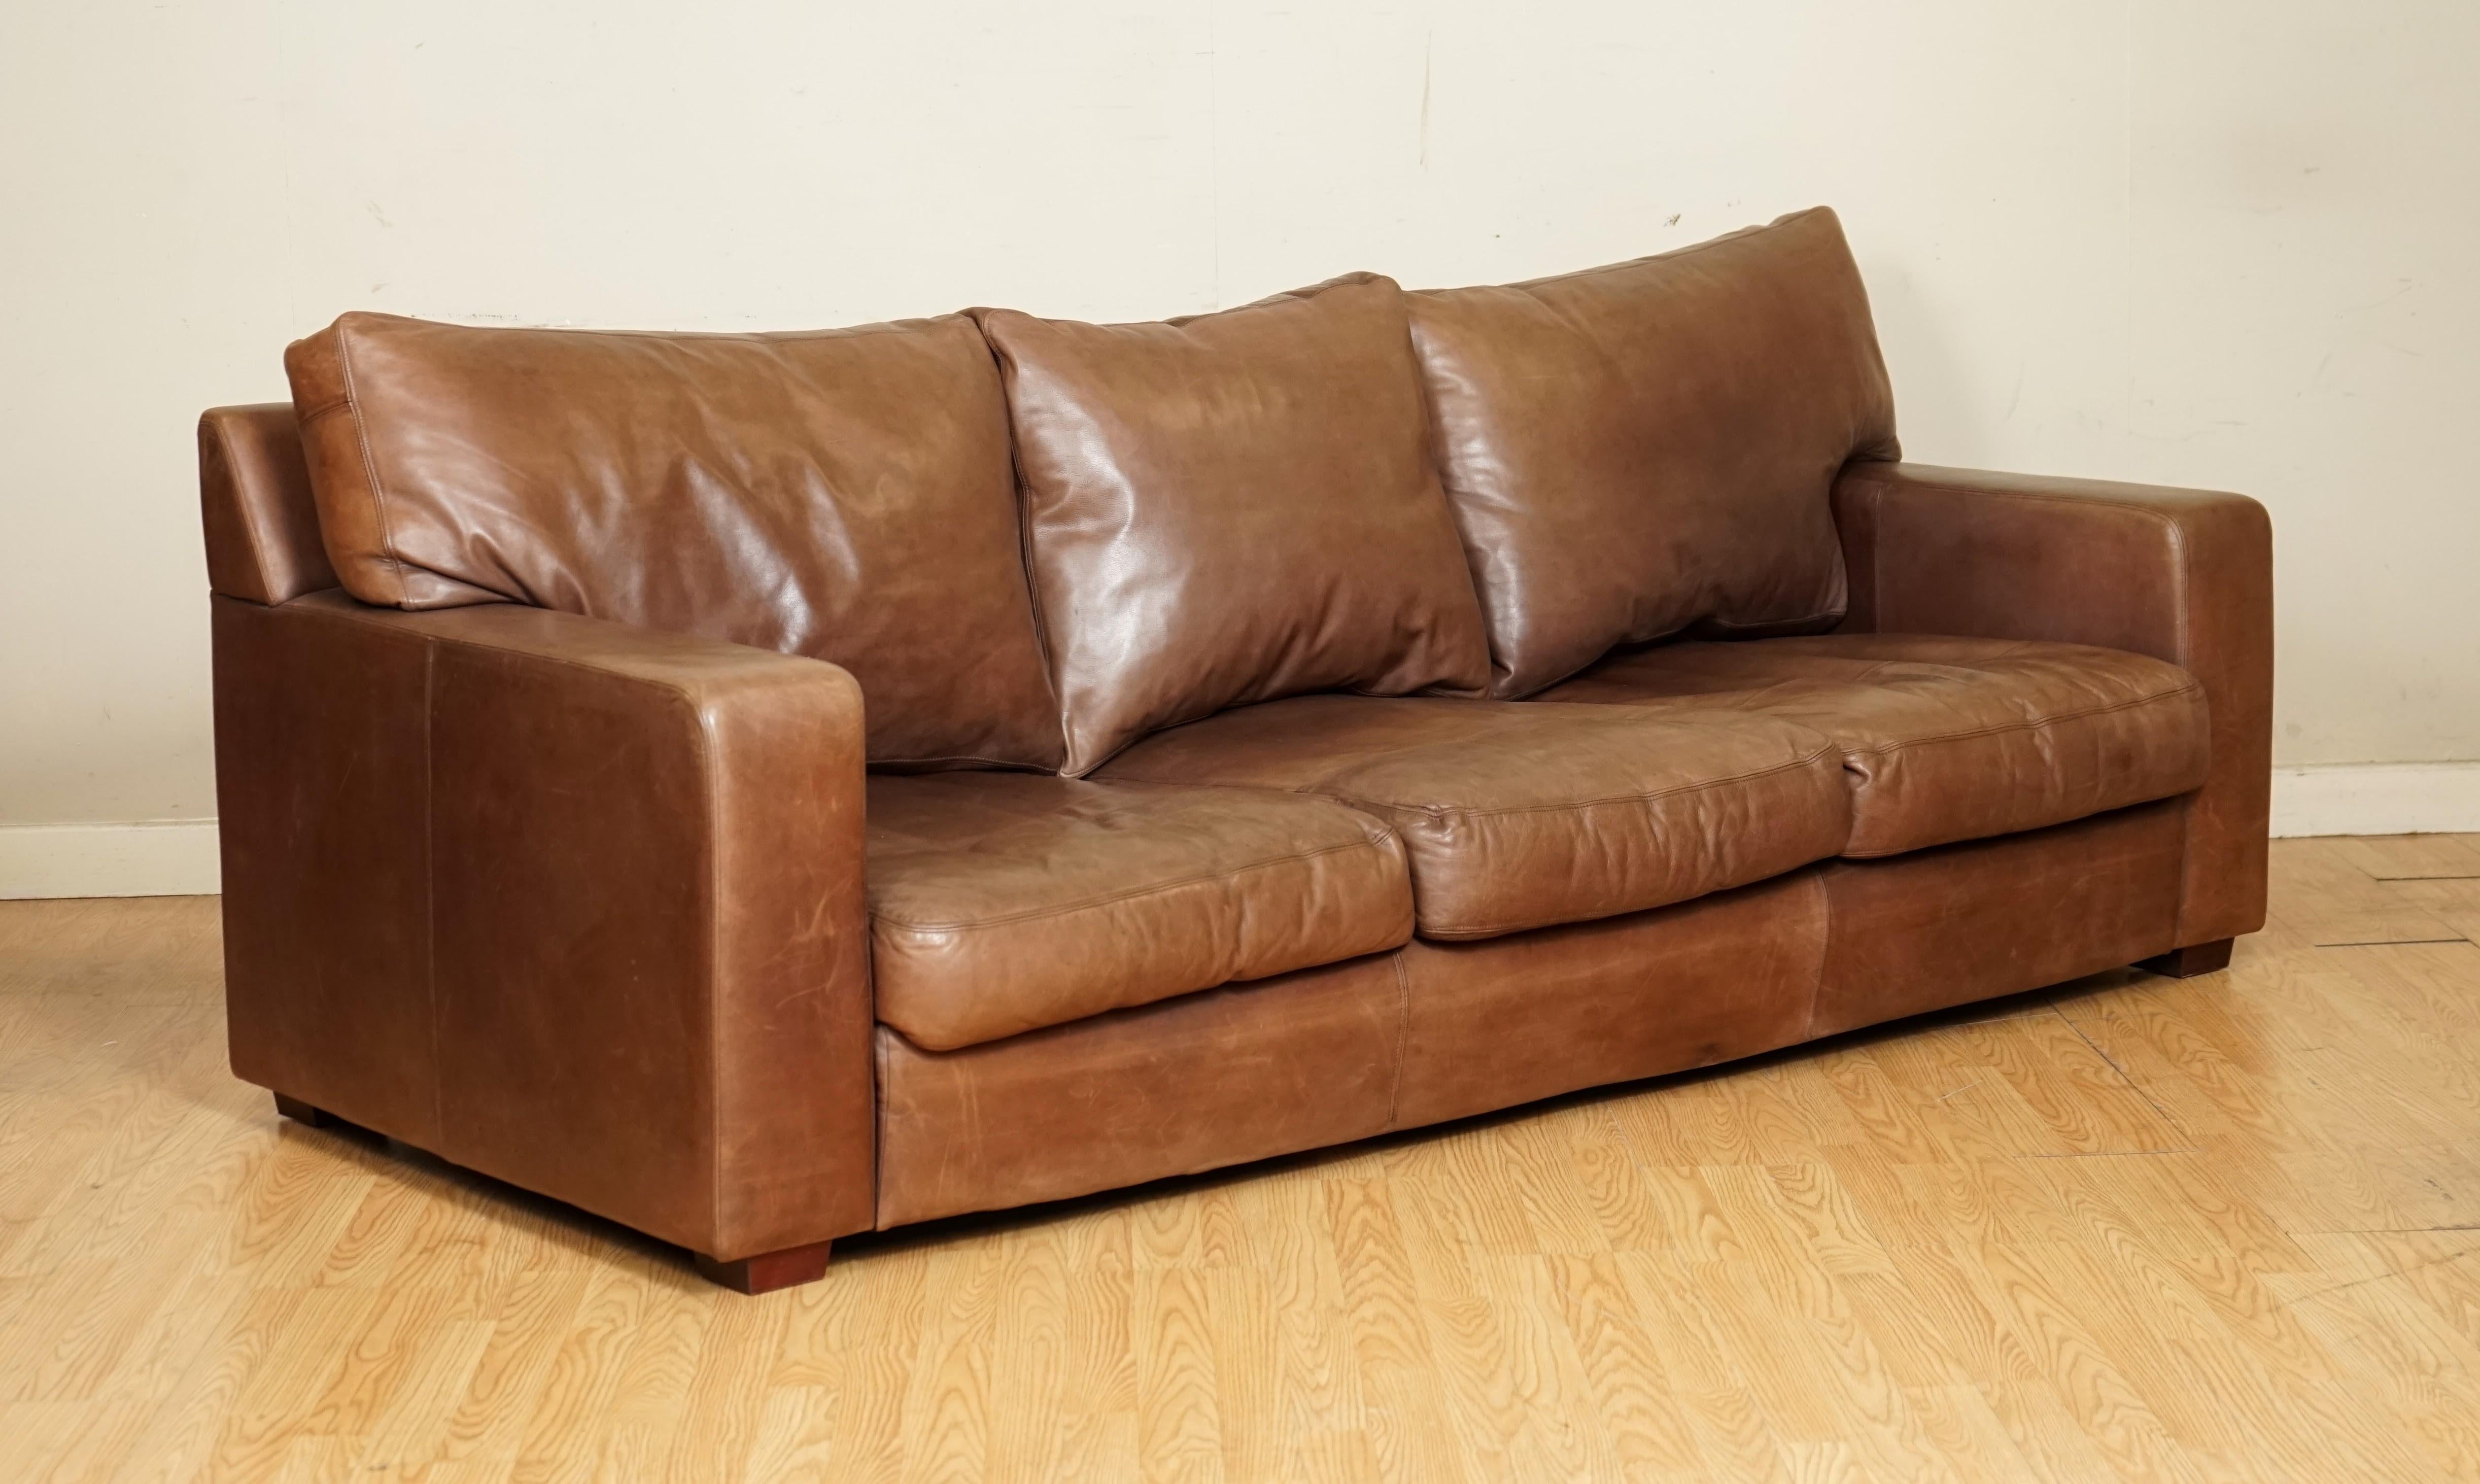 We are so excited to present to you this Beautiful Buttery Soft Leather Collins & Hayes Sofa.

This sofa is a very well made a solid piece. The arms are removable, so it can manouver better to get inside your home and the back cushions are feather